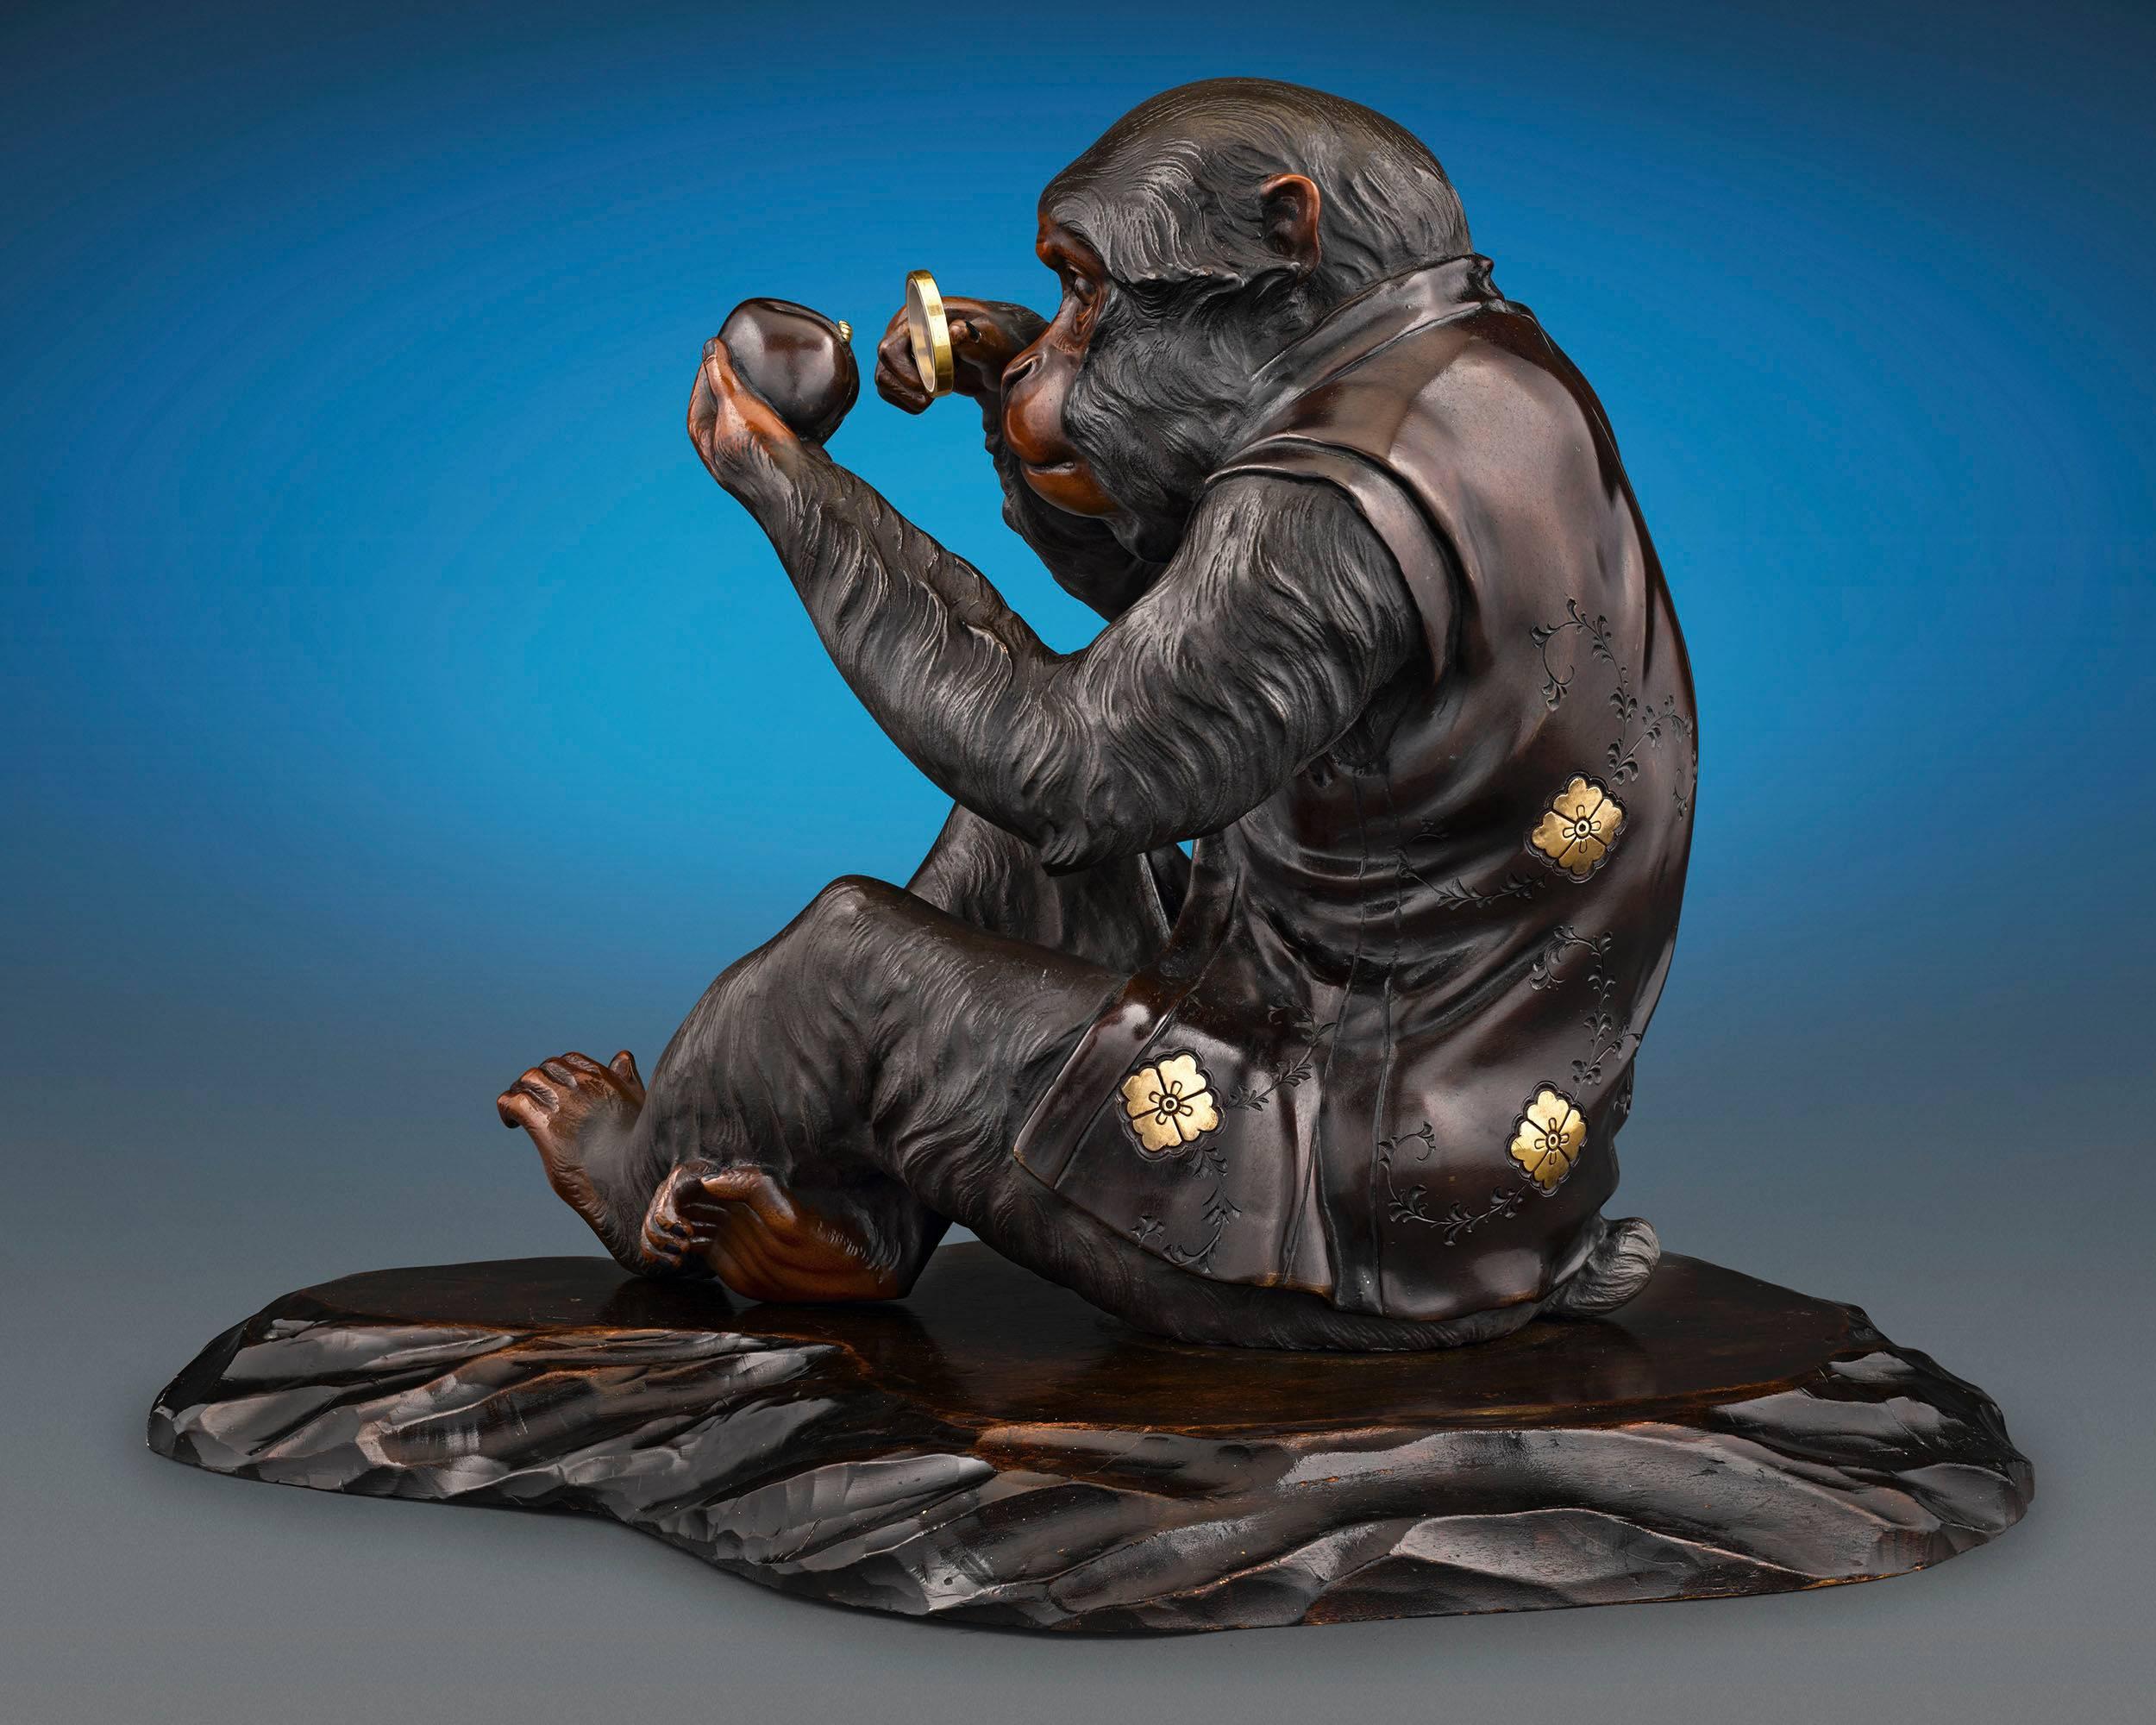 This extraordinary Japanese bronze sculpture takes the form of a charming monkey inspecting a peach. Crafted during the artistically creative and prolific Meiji Period, this inquisitive primate has been sculpted with the utmost attention to detail.